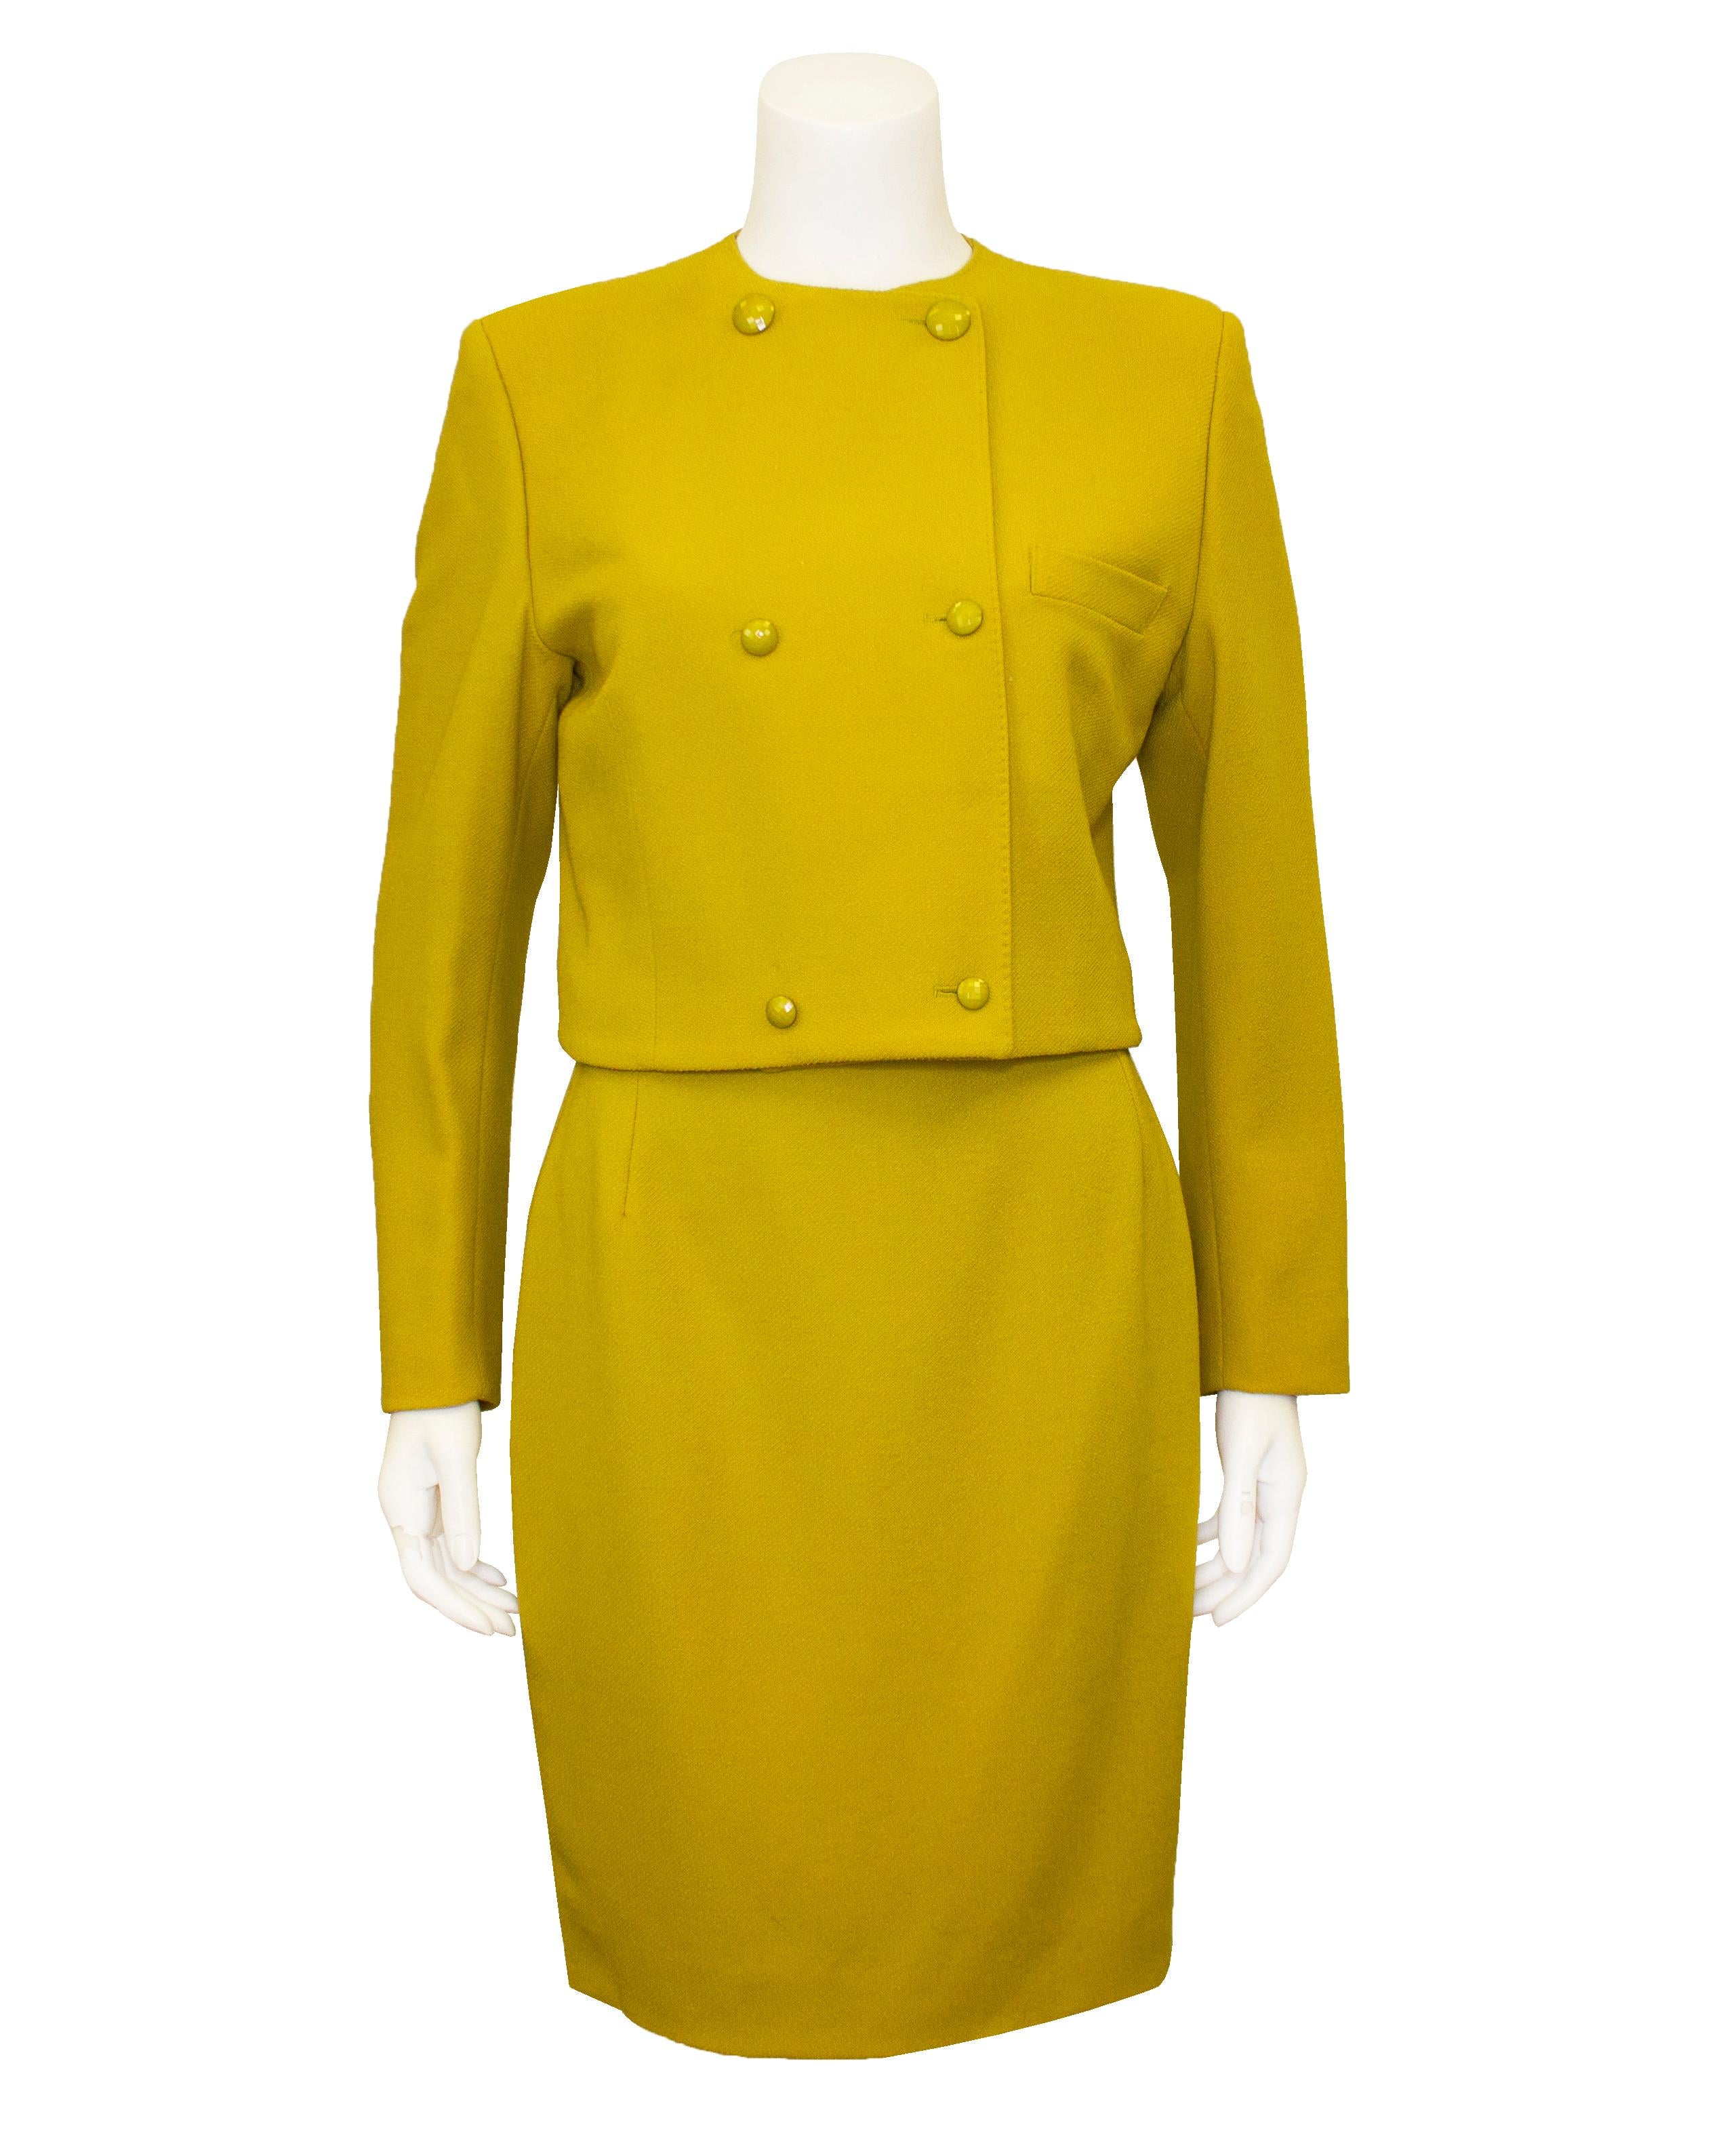 Very unique Gianni Versace three piece ensemble featuring a chartreuse wool scarf, jacket and skirt from the 1980s. The jacket is collarless, cropped and double breasted with a single slit pocket and matching plastic chartreuse buttons. The skirt is